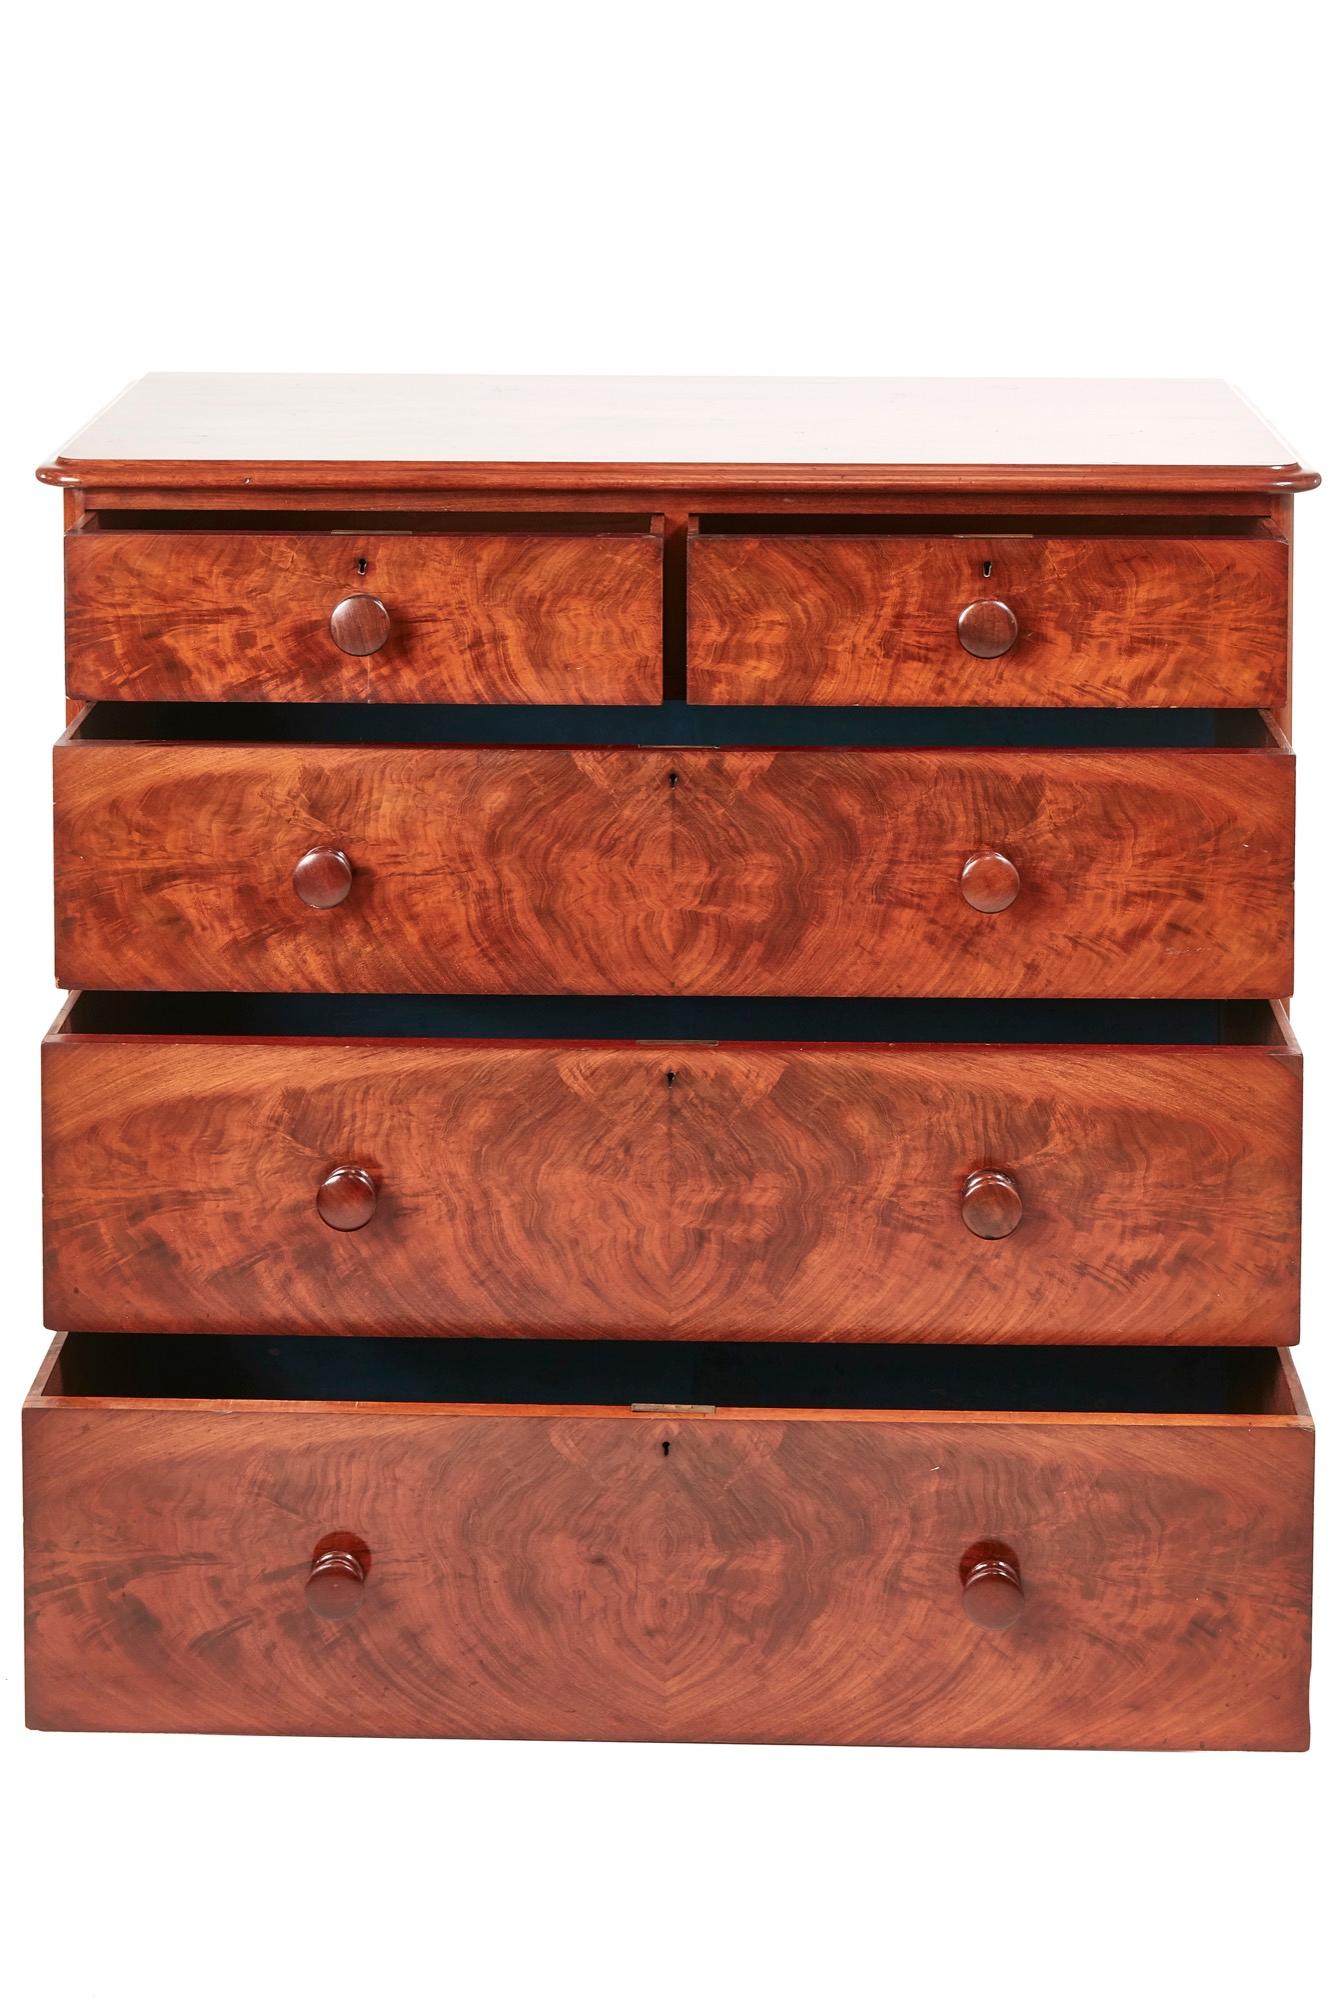 Quality Victorian mahogany chest of drawers, having a lovely quality top with a thumb moulded edge, two short and three long drawers with original mahogany turned knobs, standing on a plinth base with turned feet
Fantastic color and